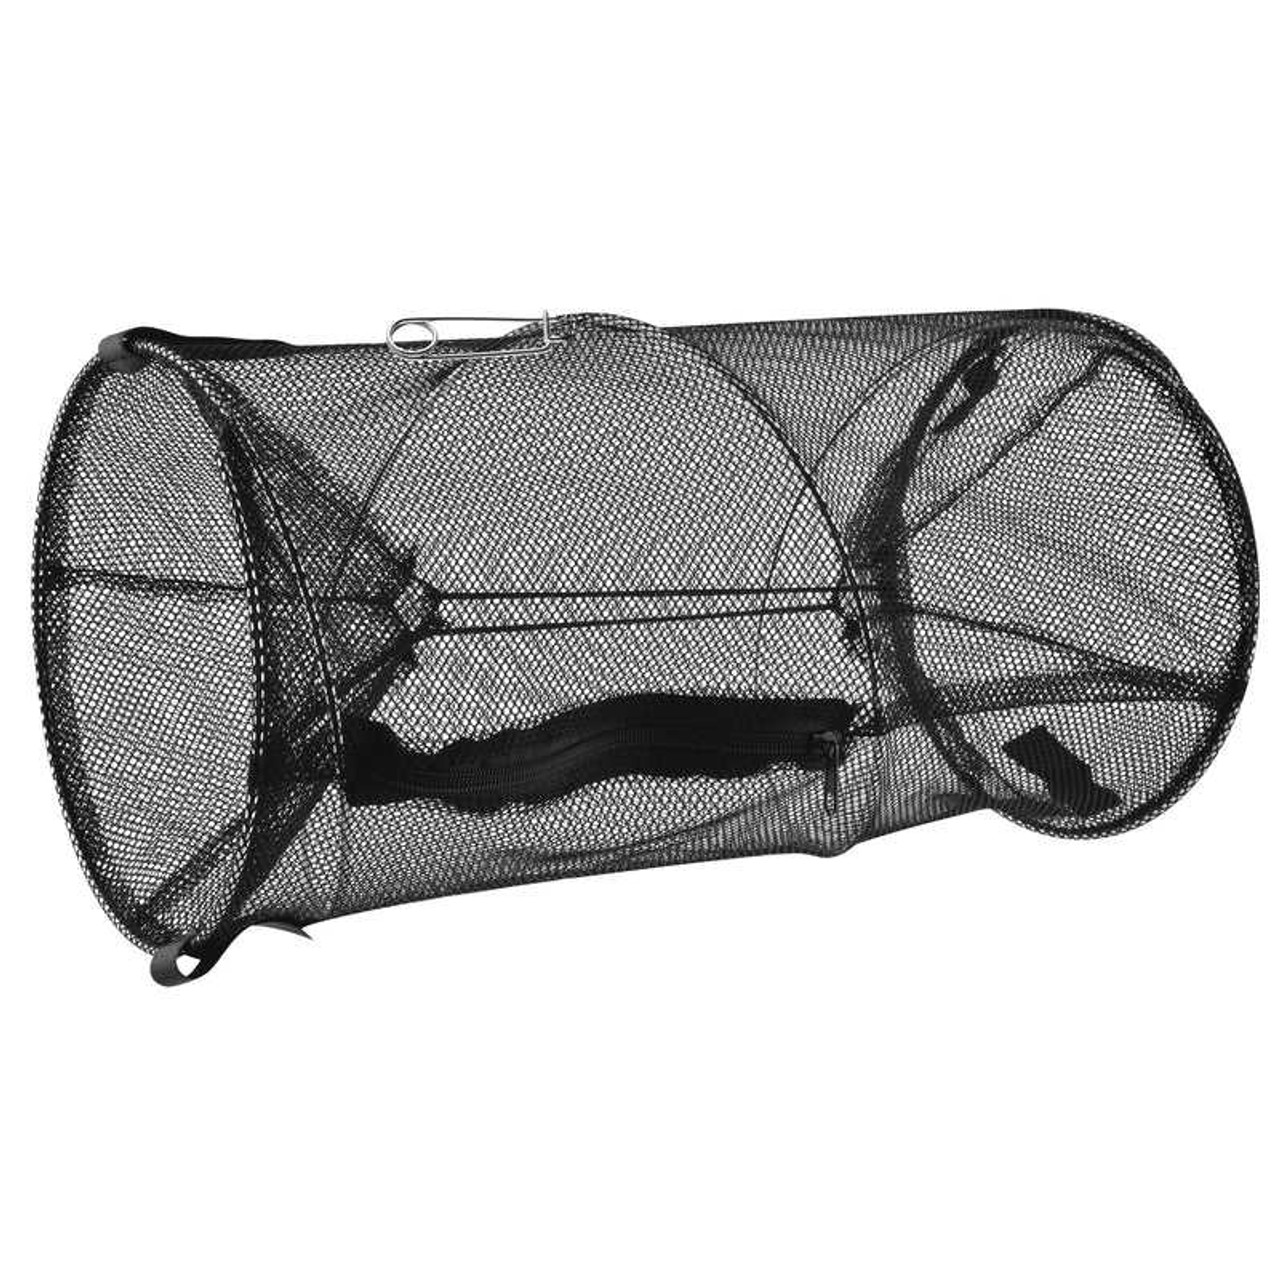 South Bend Collapsible Minnow Trap